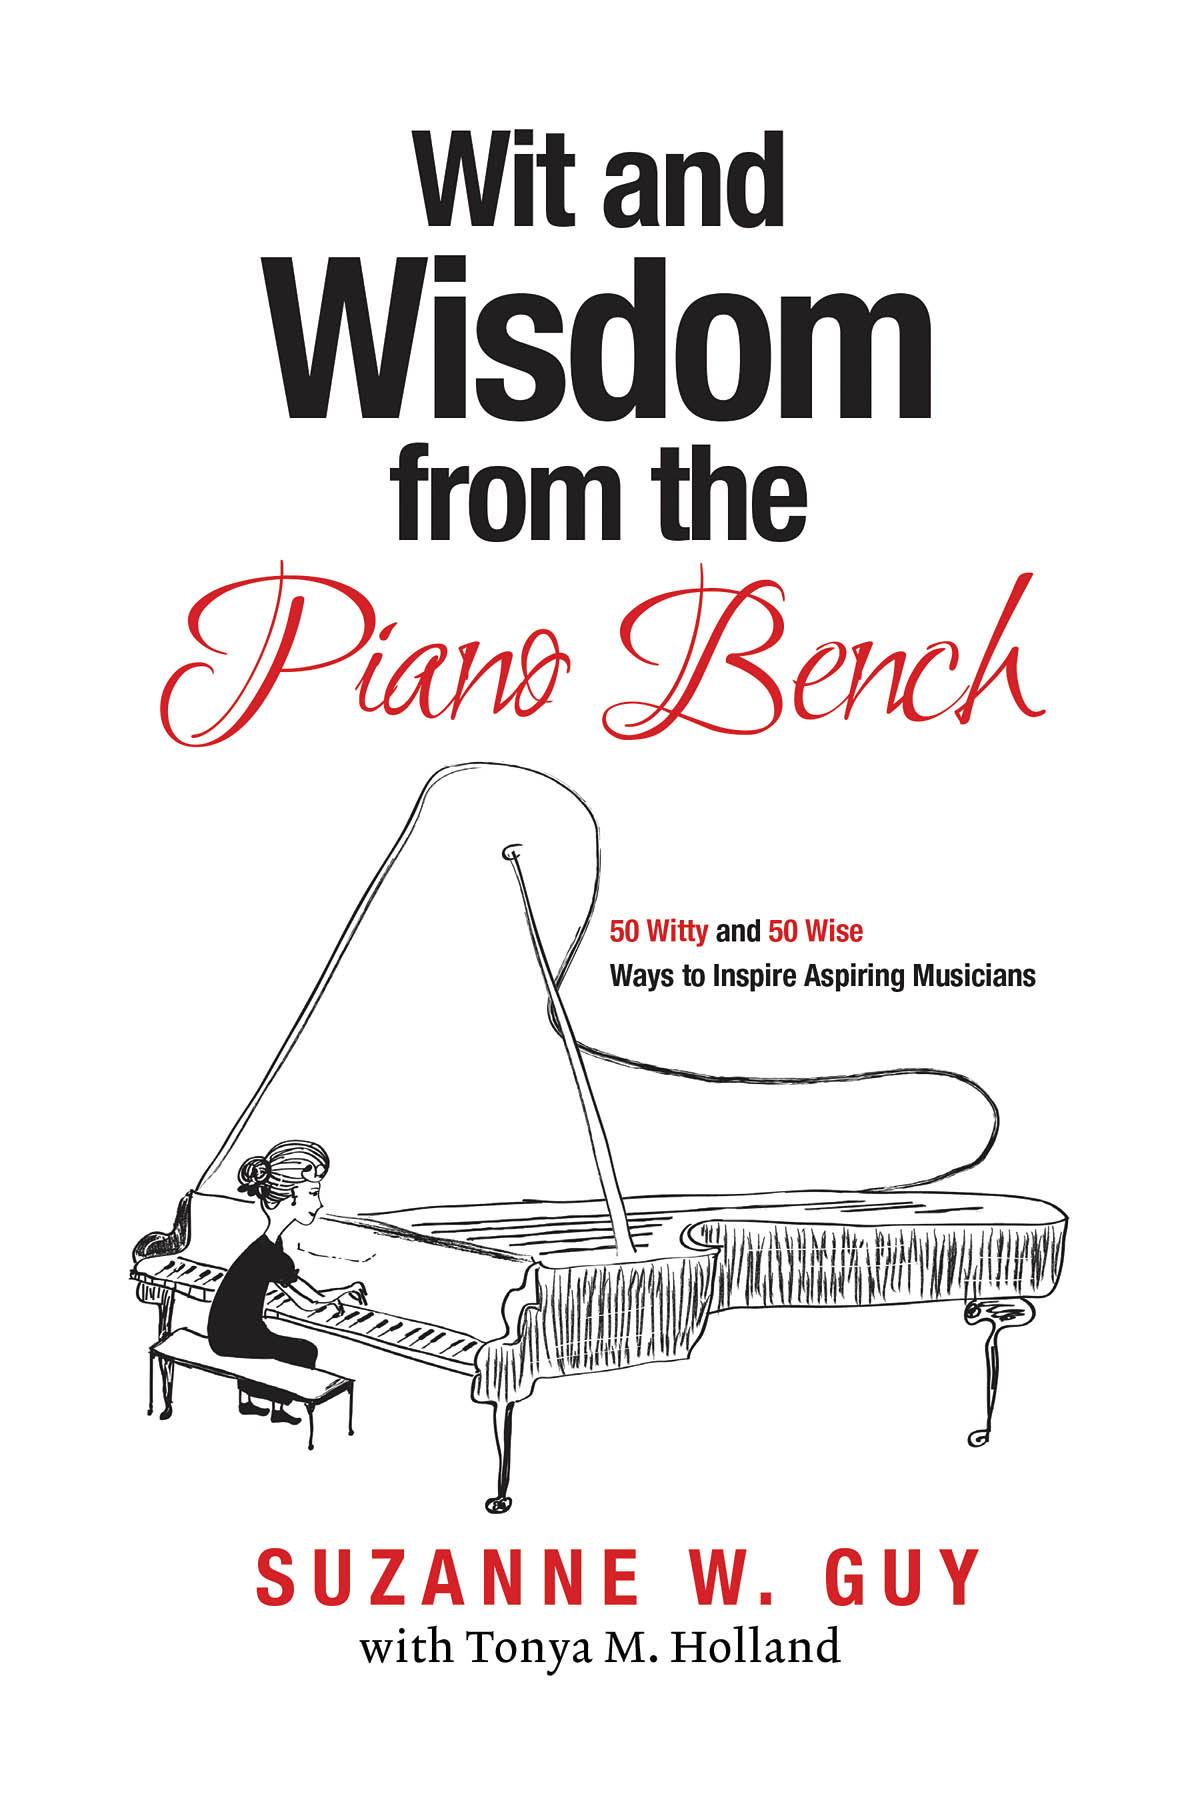 Suzanne W. Guy Tonya M. Holland: Wit and Wisdom from the Piano Bench: Piano: